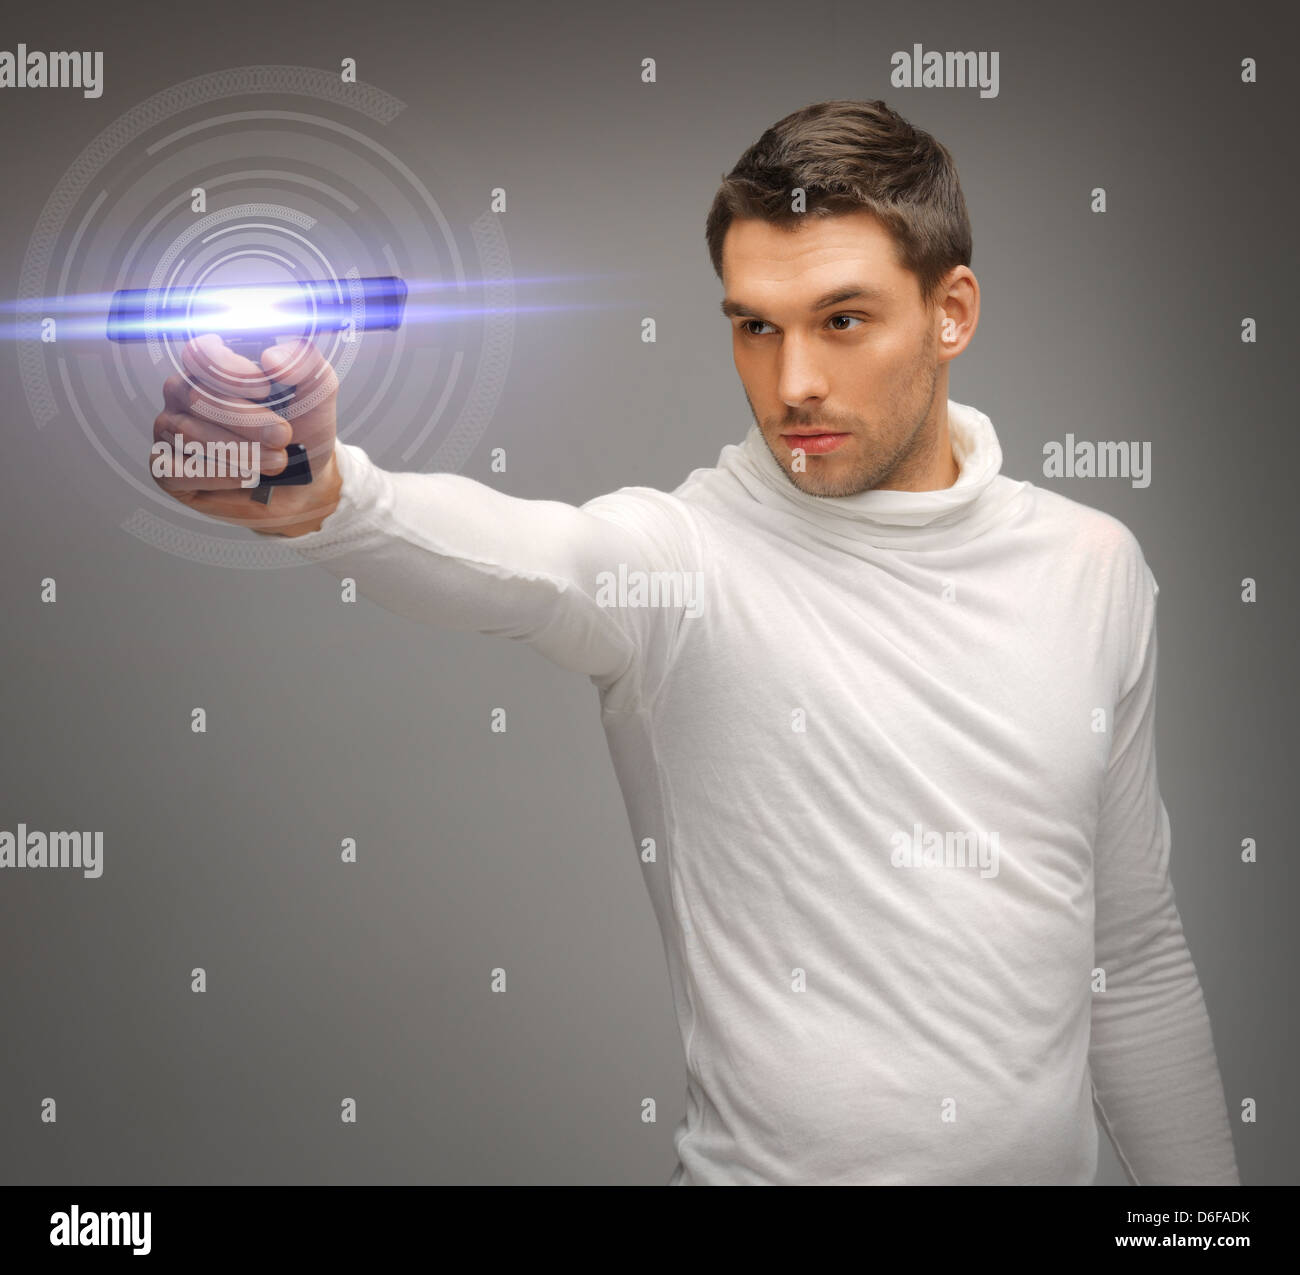 man with sci fi weapon Stock Photo